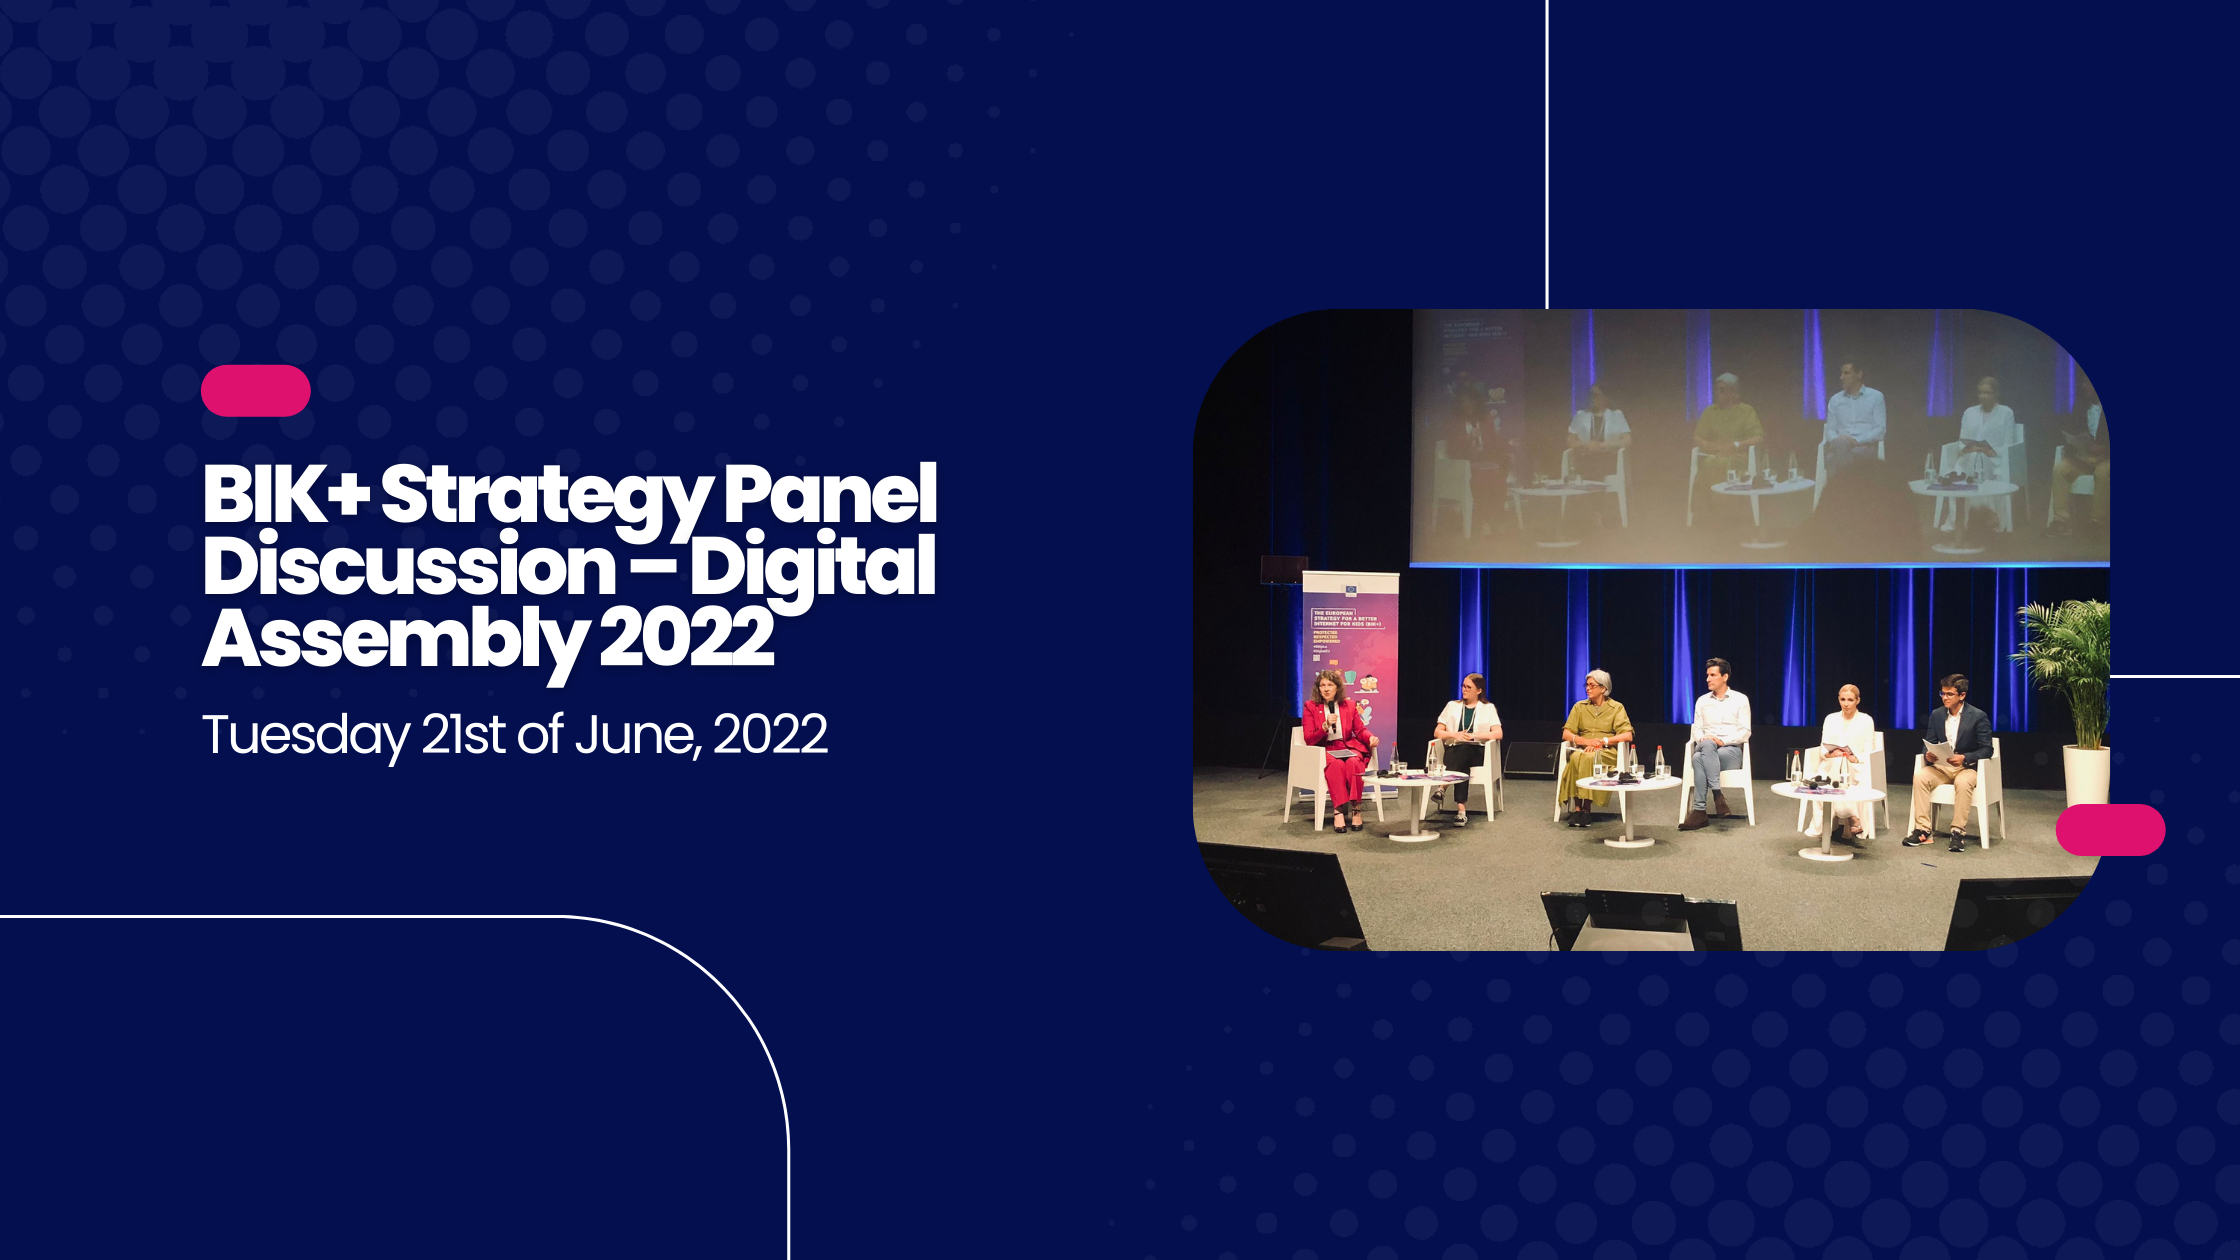 BIK+ Strategy Panel Discussion – Digital Assembly 2022